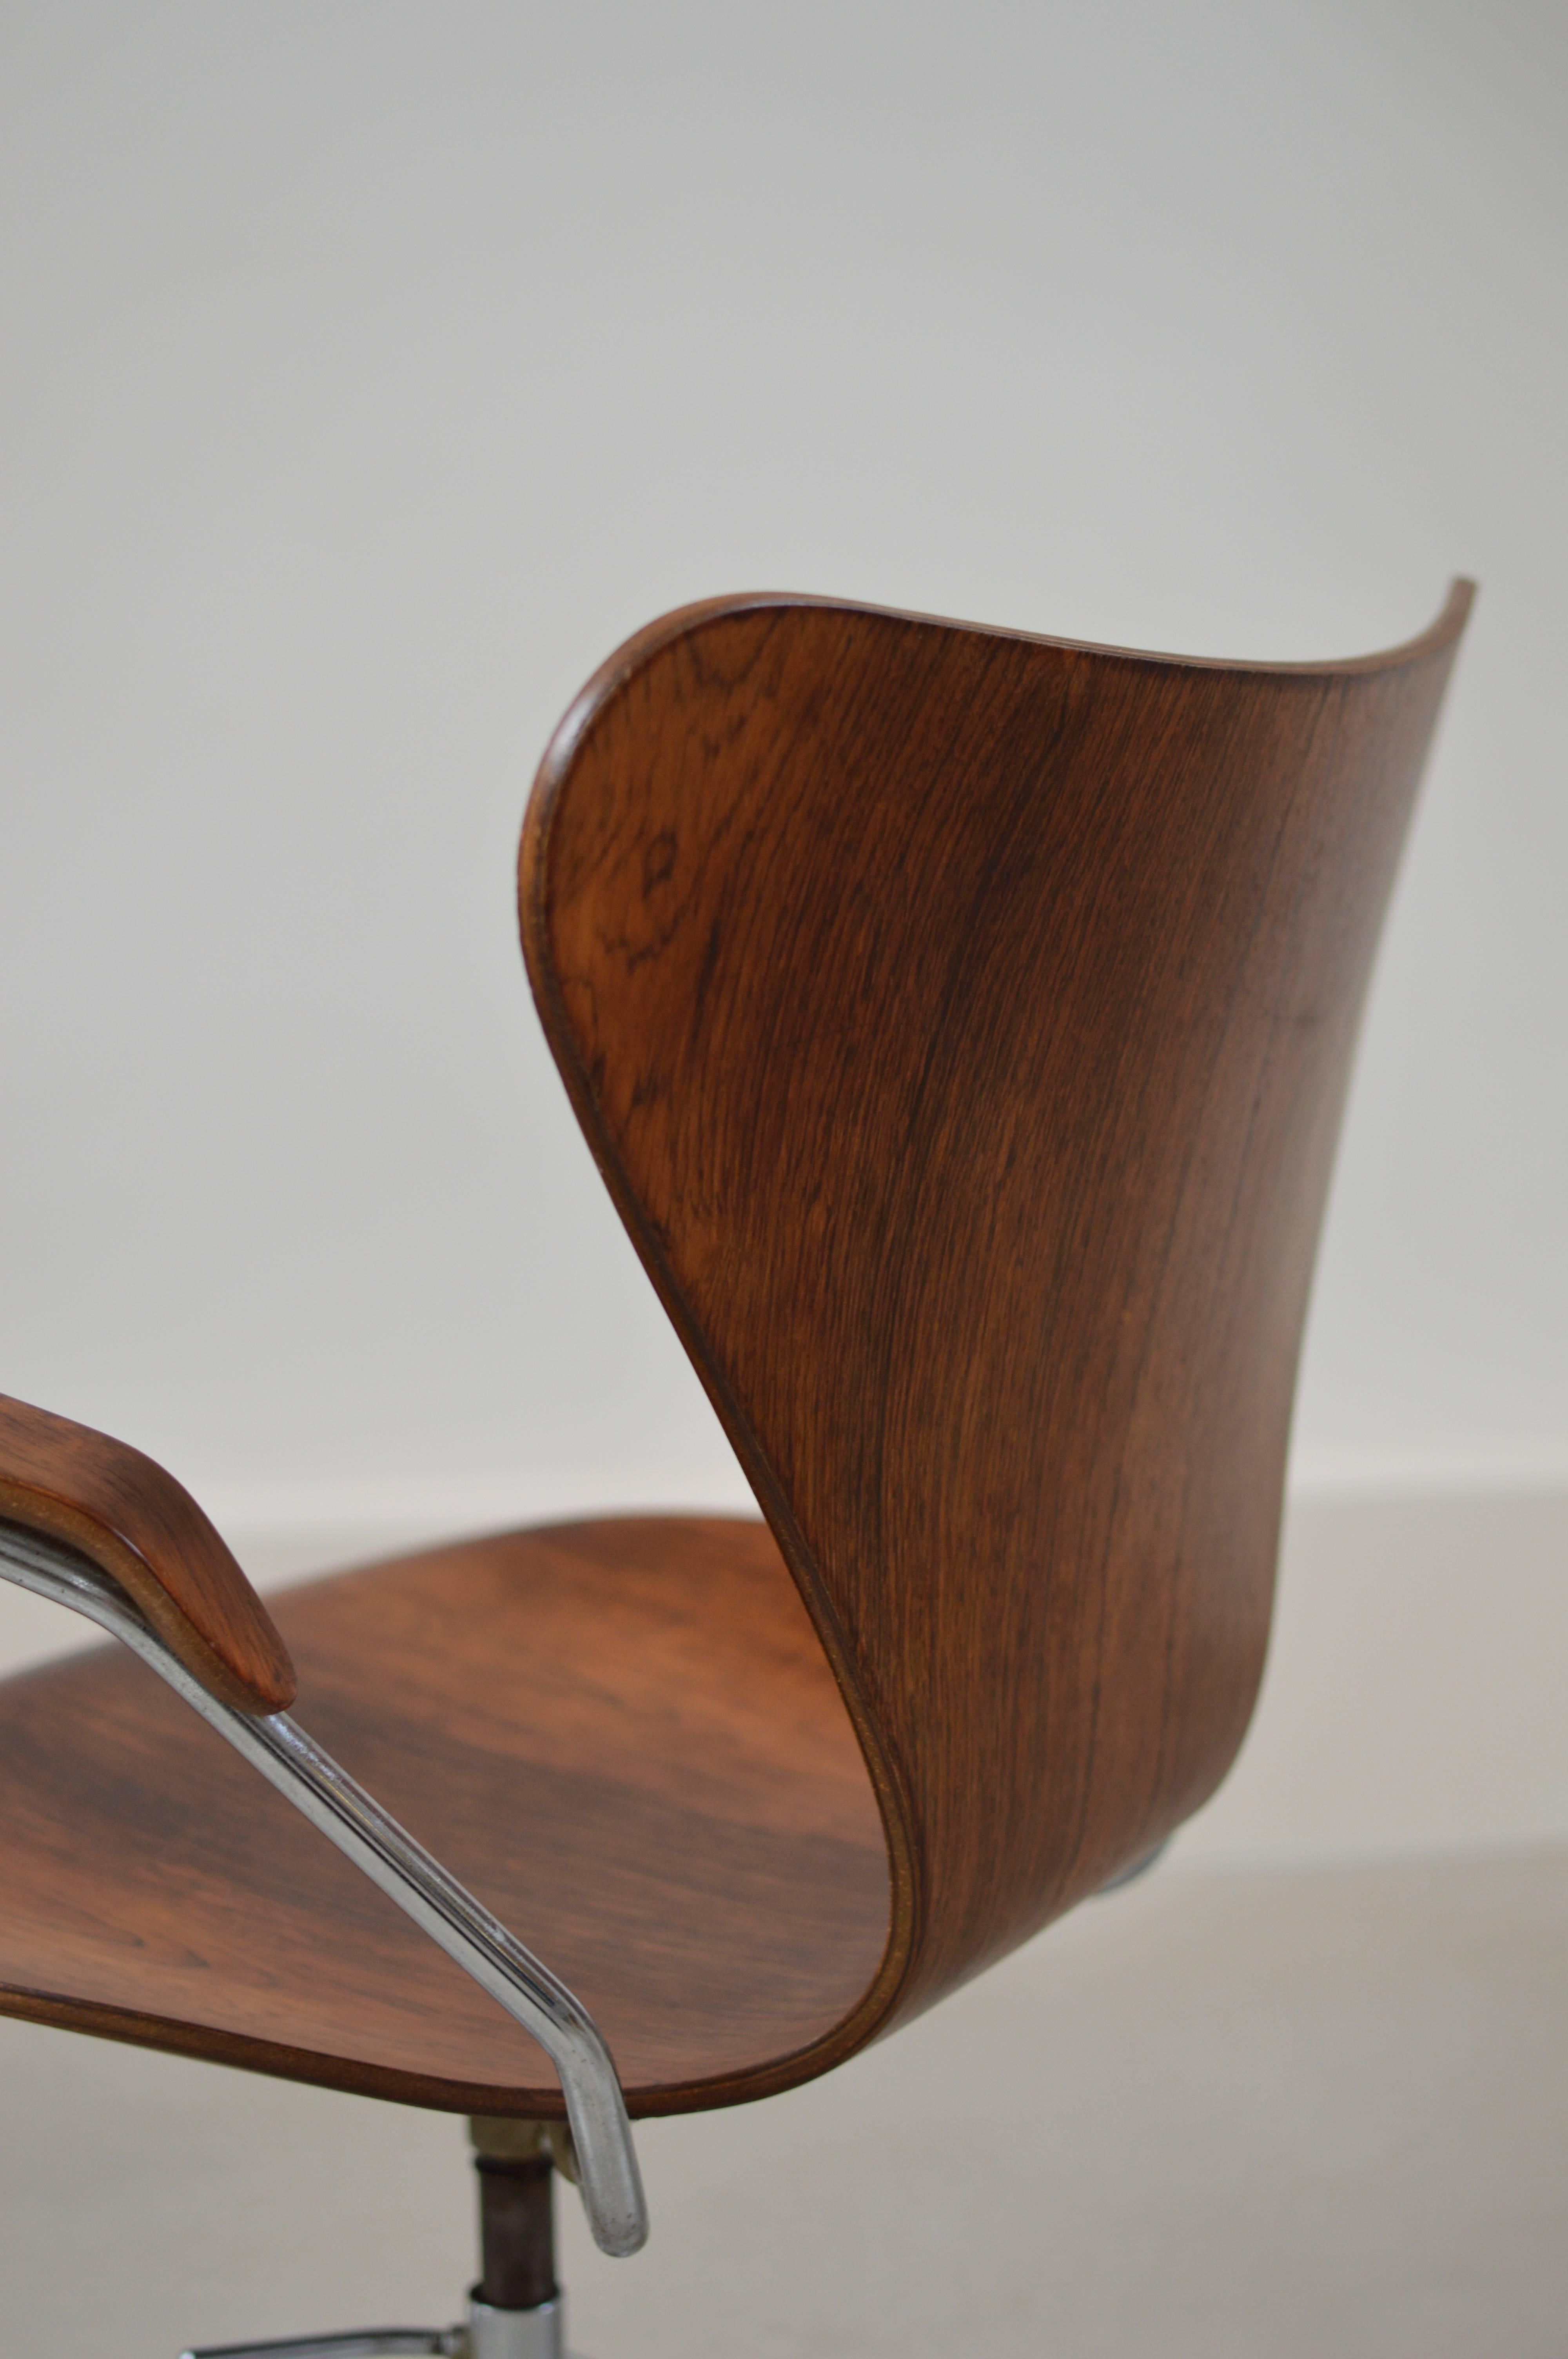 Mid-20th Century Rare First Production Series Rosewood Arne Jacobsen Desk Chair